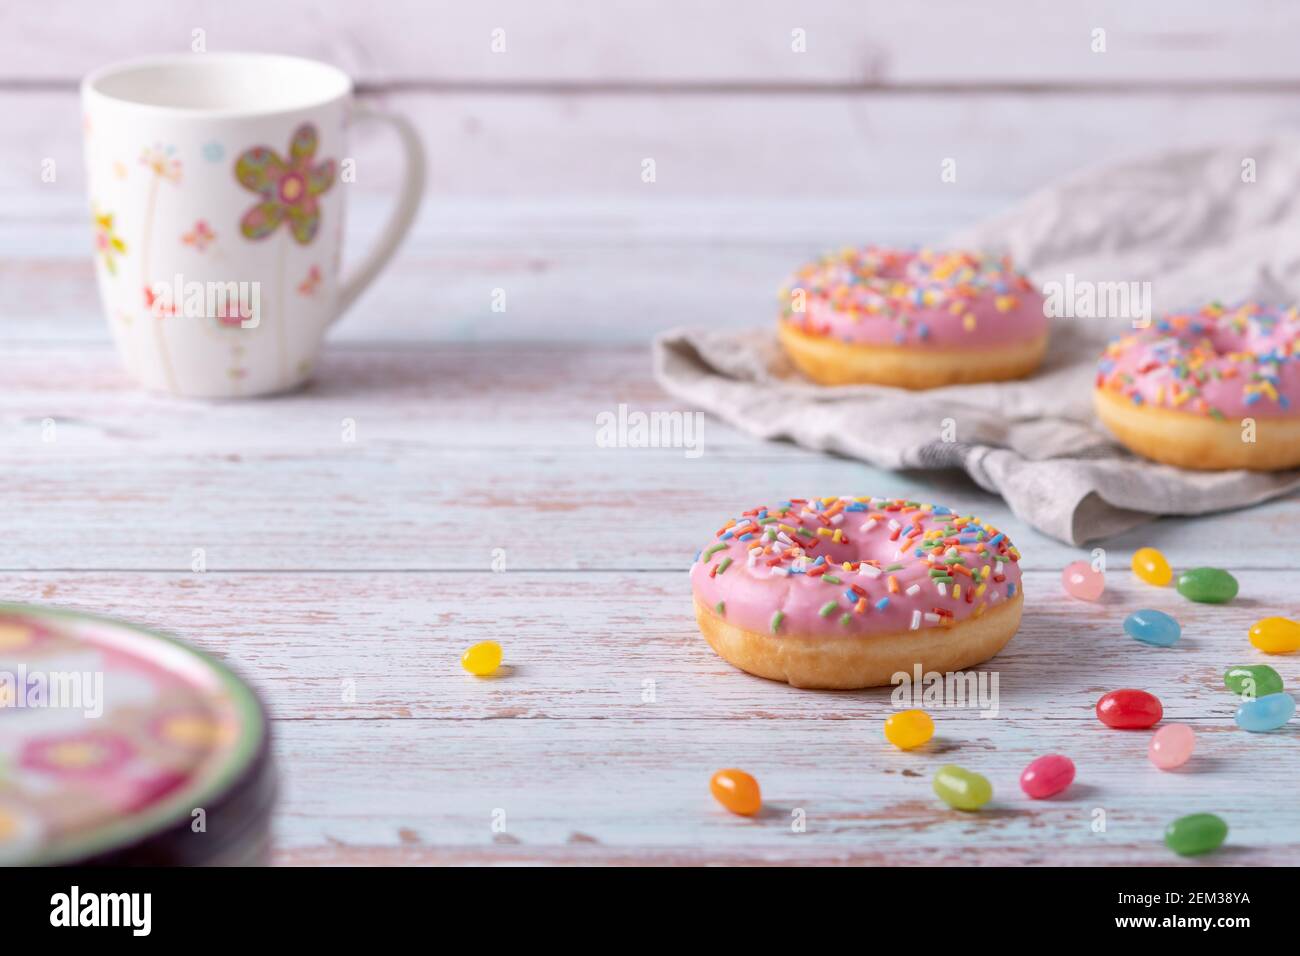 Tasty donuts with pink icing, colorful sprinkles and jelly beans on wooden background. Sweet pastry as a snack for children's birthday party. Stock Photo